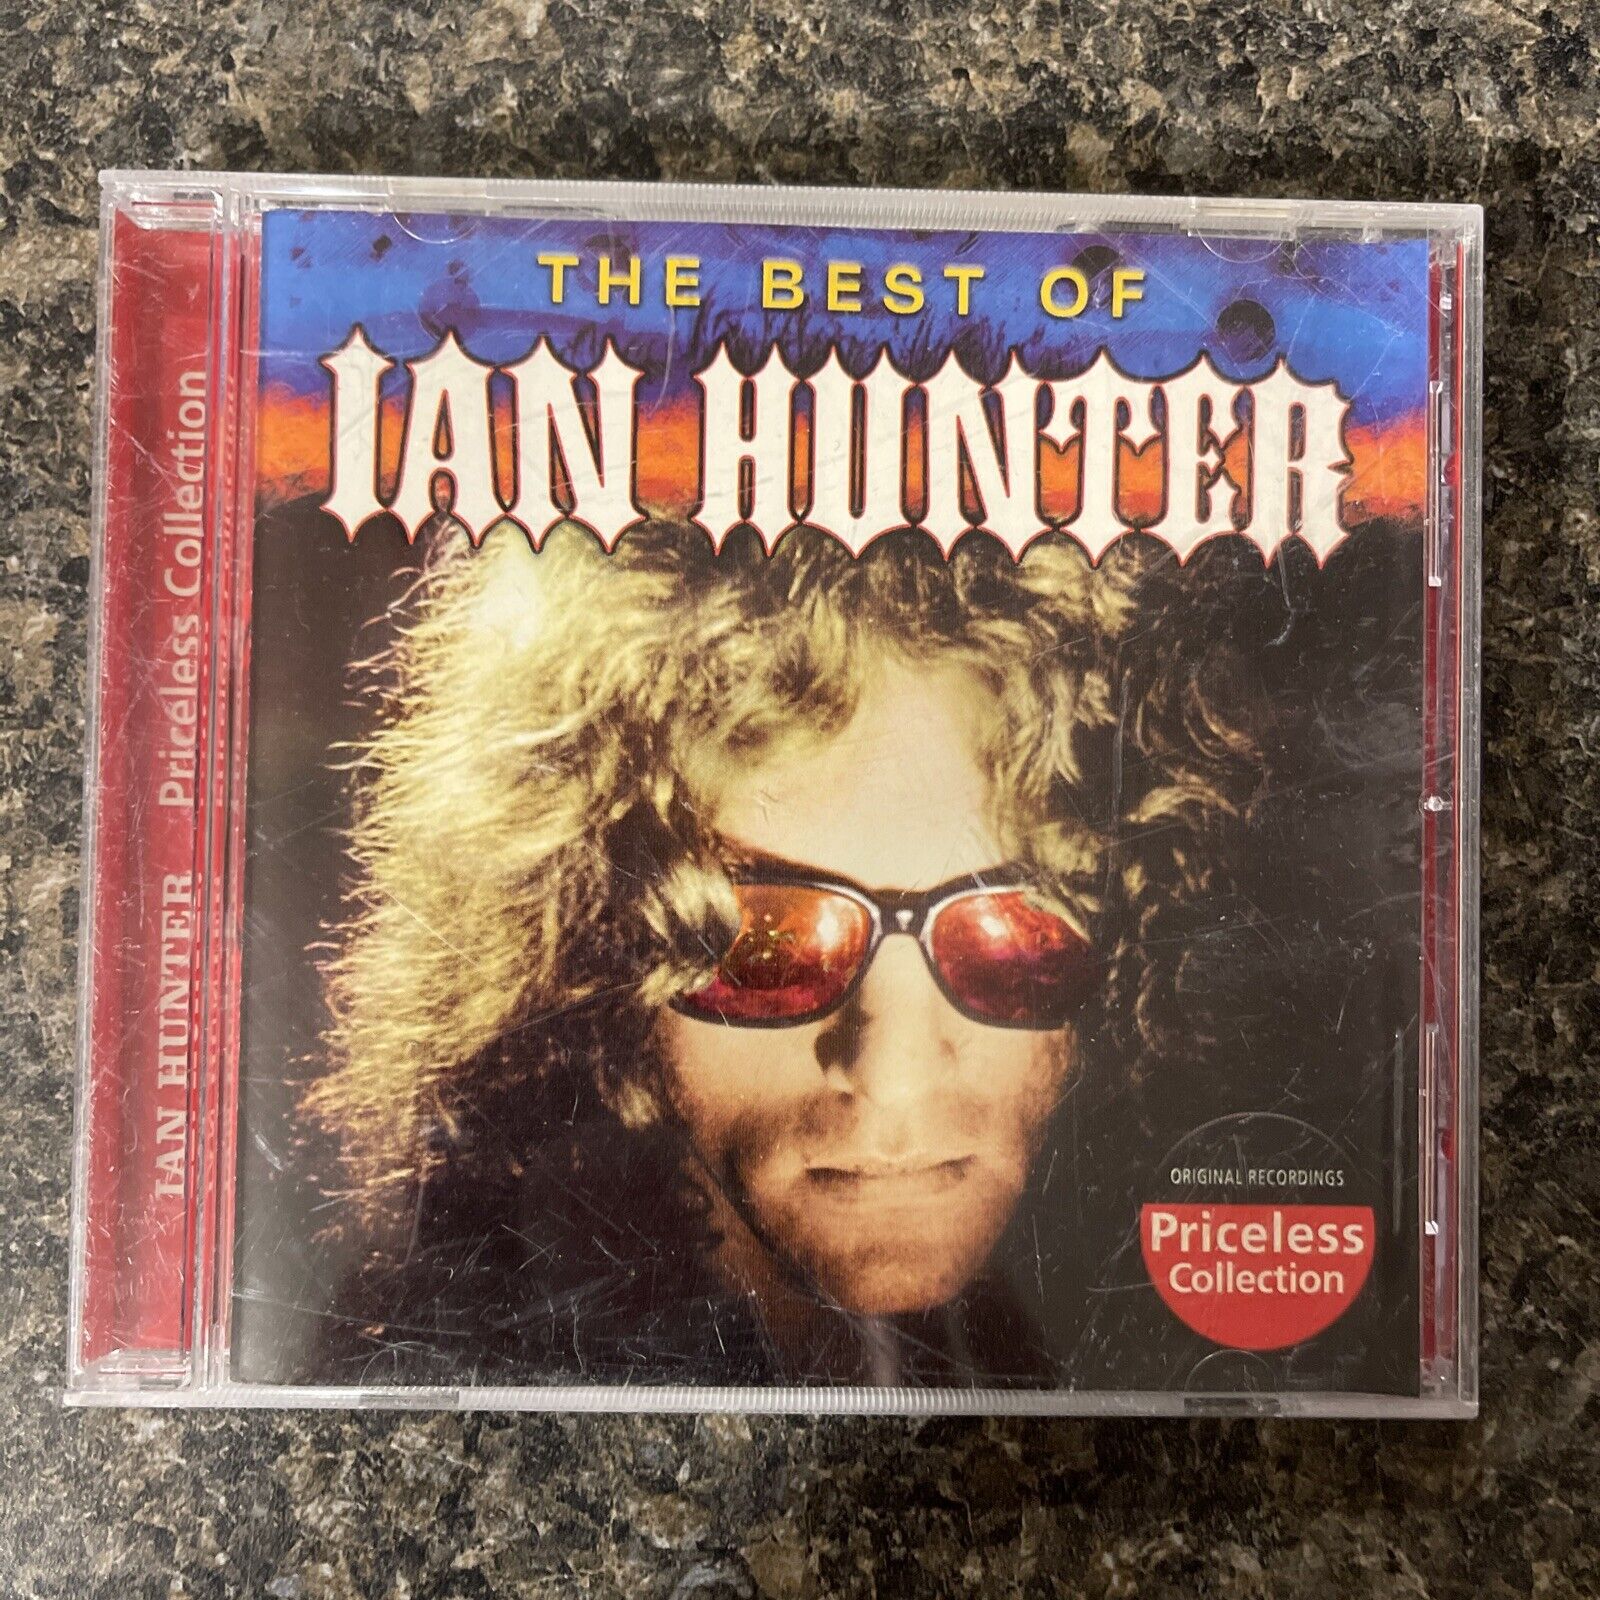 The Best of Ian Hunter [Collectables] by Ian Hunter (CD, Nov-2006, Collectables)